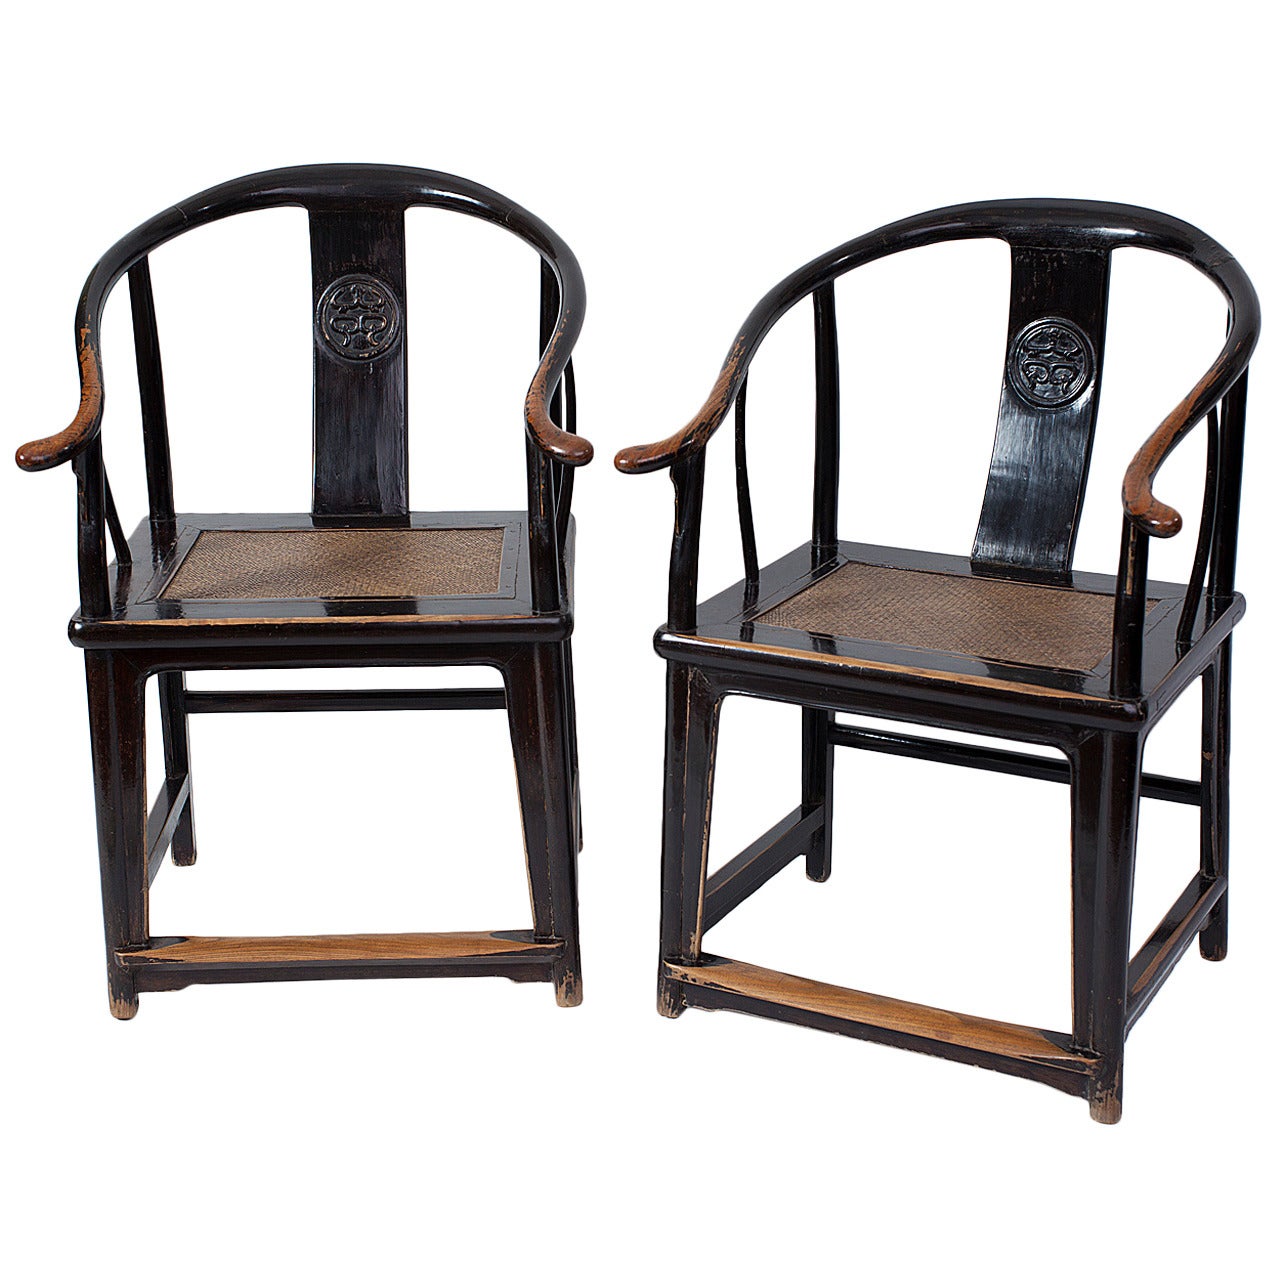 Excellent Pair of 17th Century Ming Dynasty Chinese Horseshoe Round Back Chairs For Sale